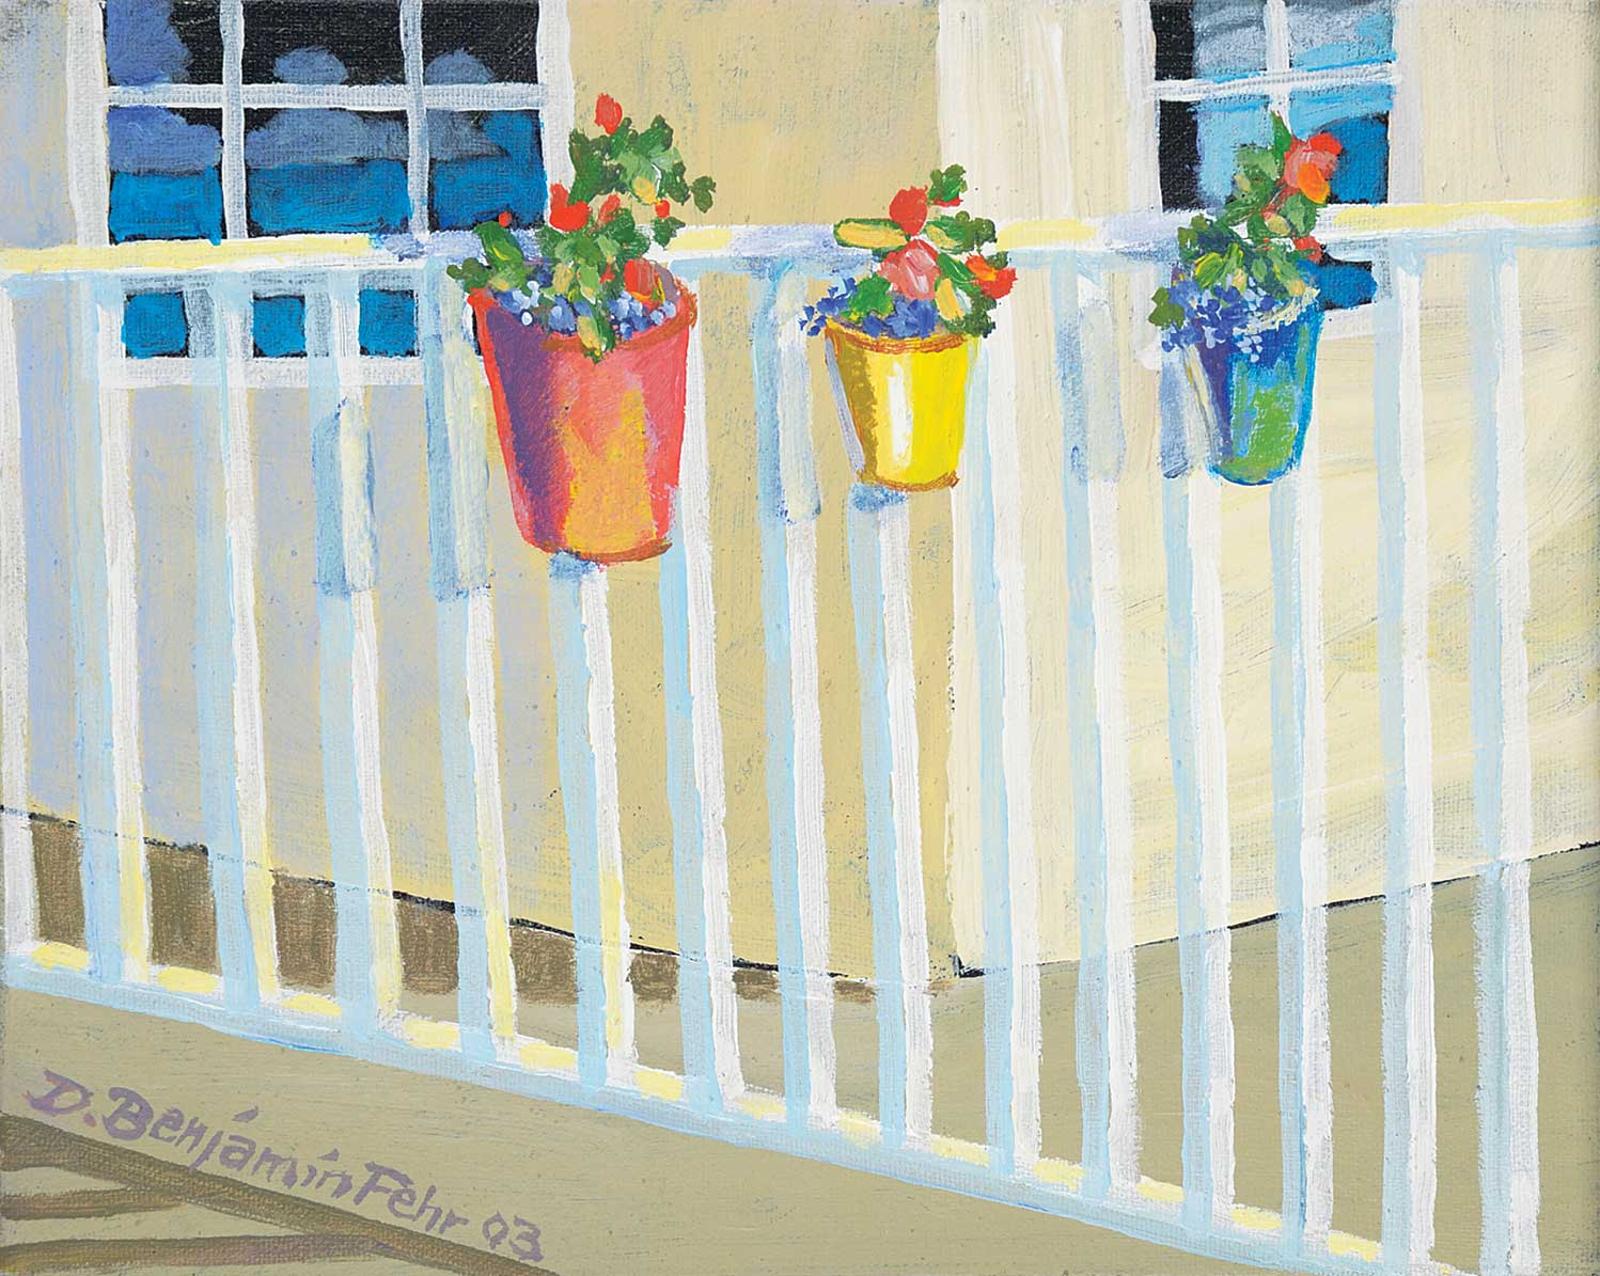 Dale Benjamin Fehr - Untitled - Flowers on the Patio